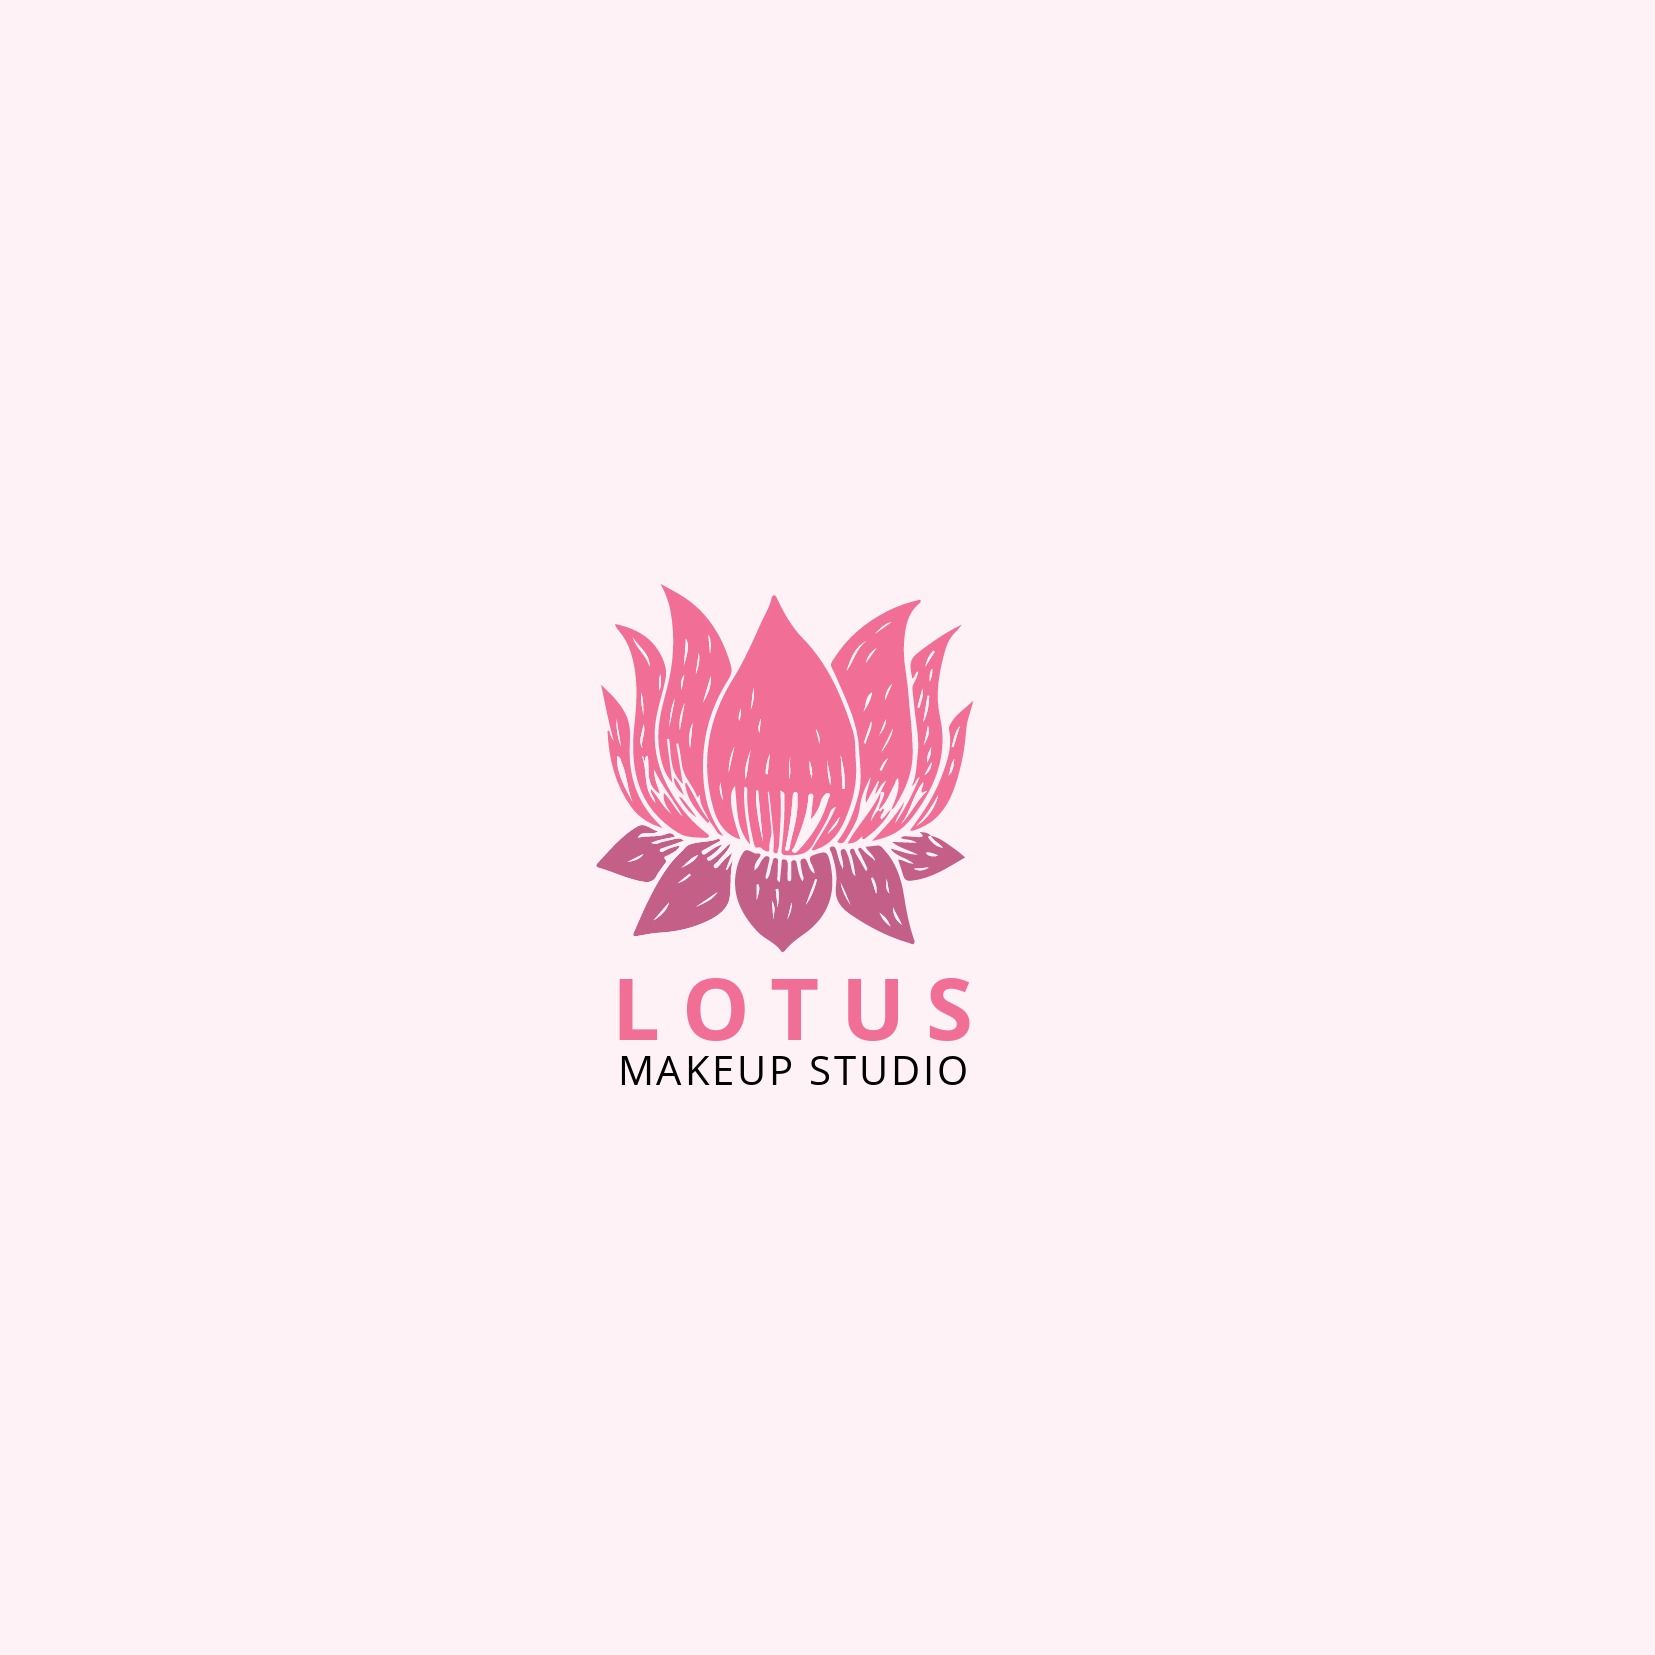 Lotus makeup studio logo on a white background - The Open Sans font is open and legible - Image